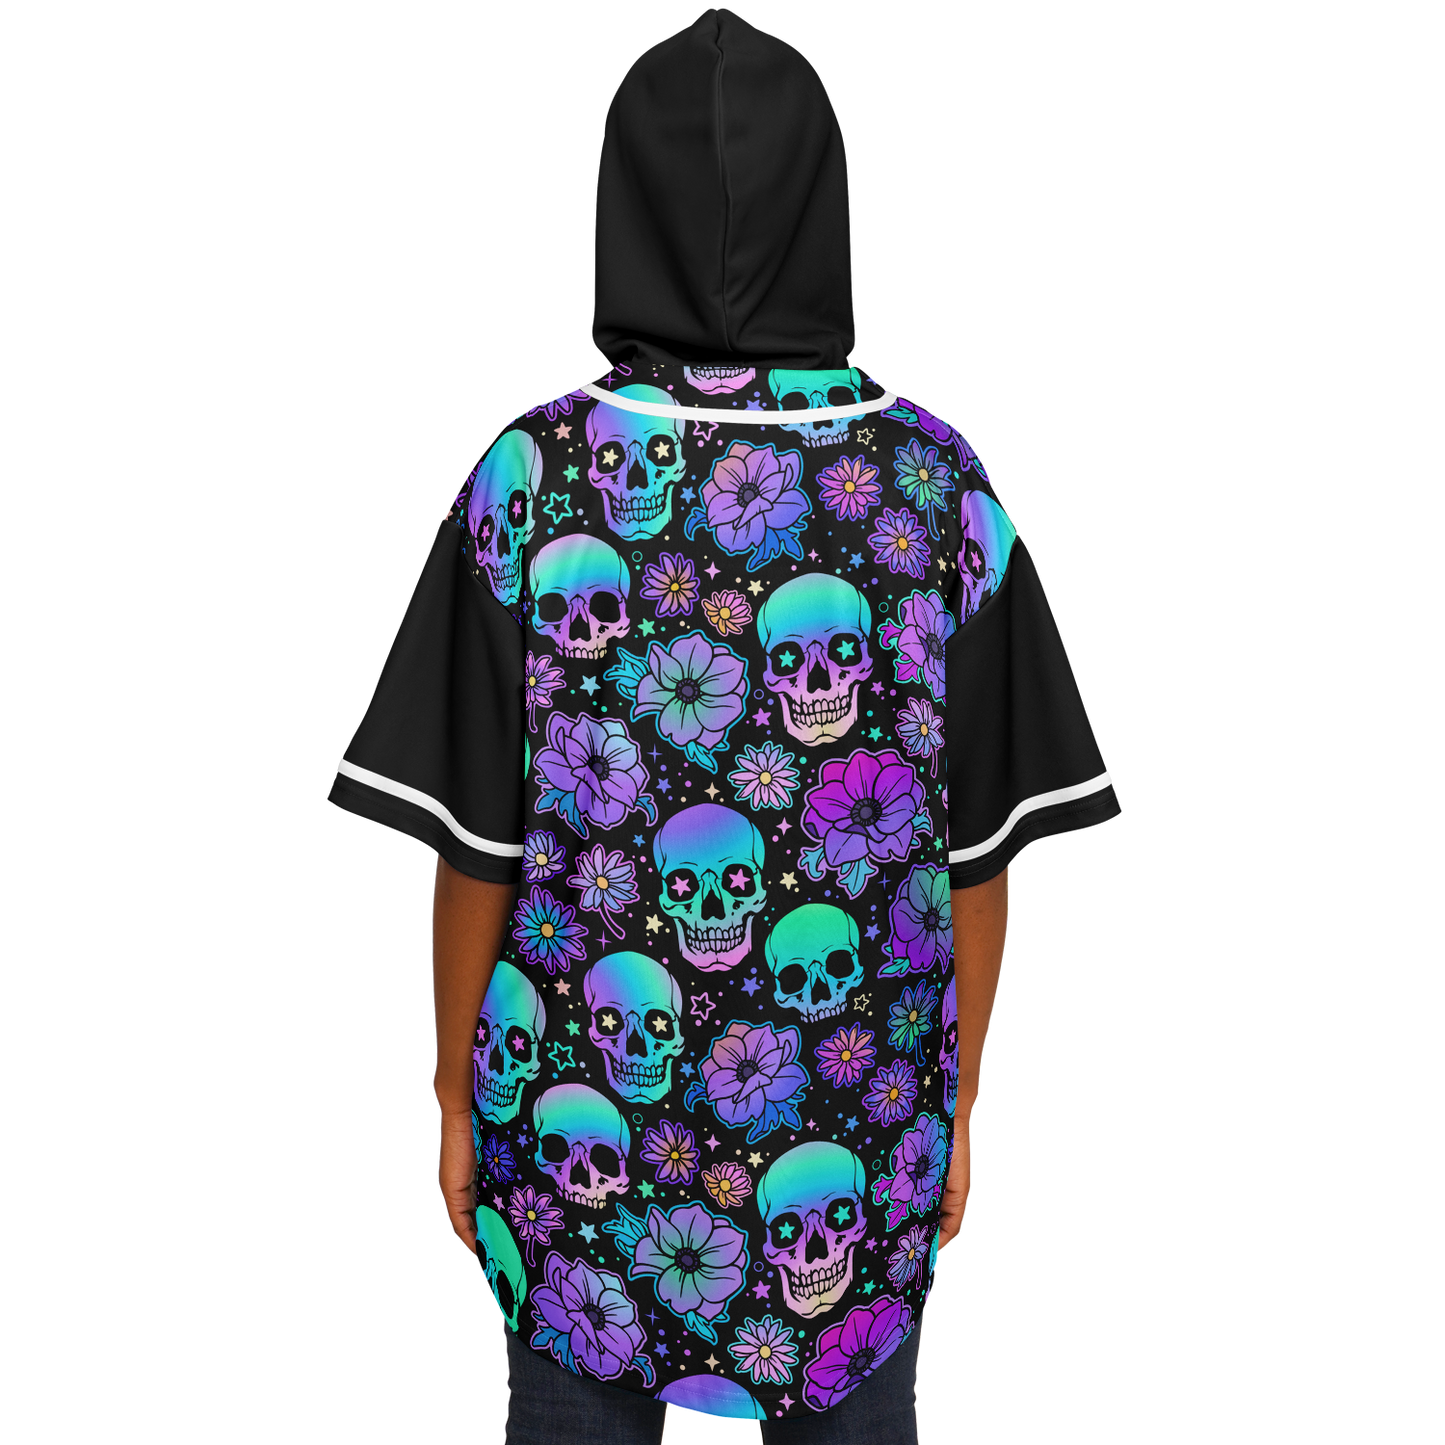 Psychedelic Rave EDM Jersey with Hood - Available for a Strictly Limited Time - Buy 2 for FREE Shipping